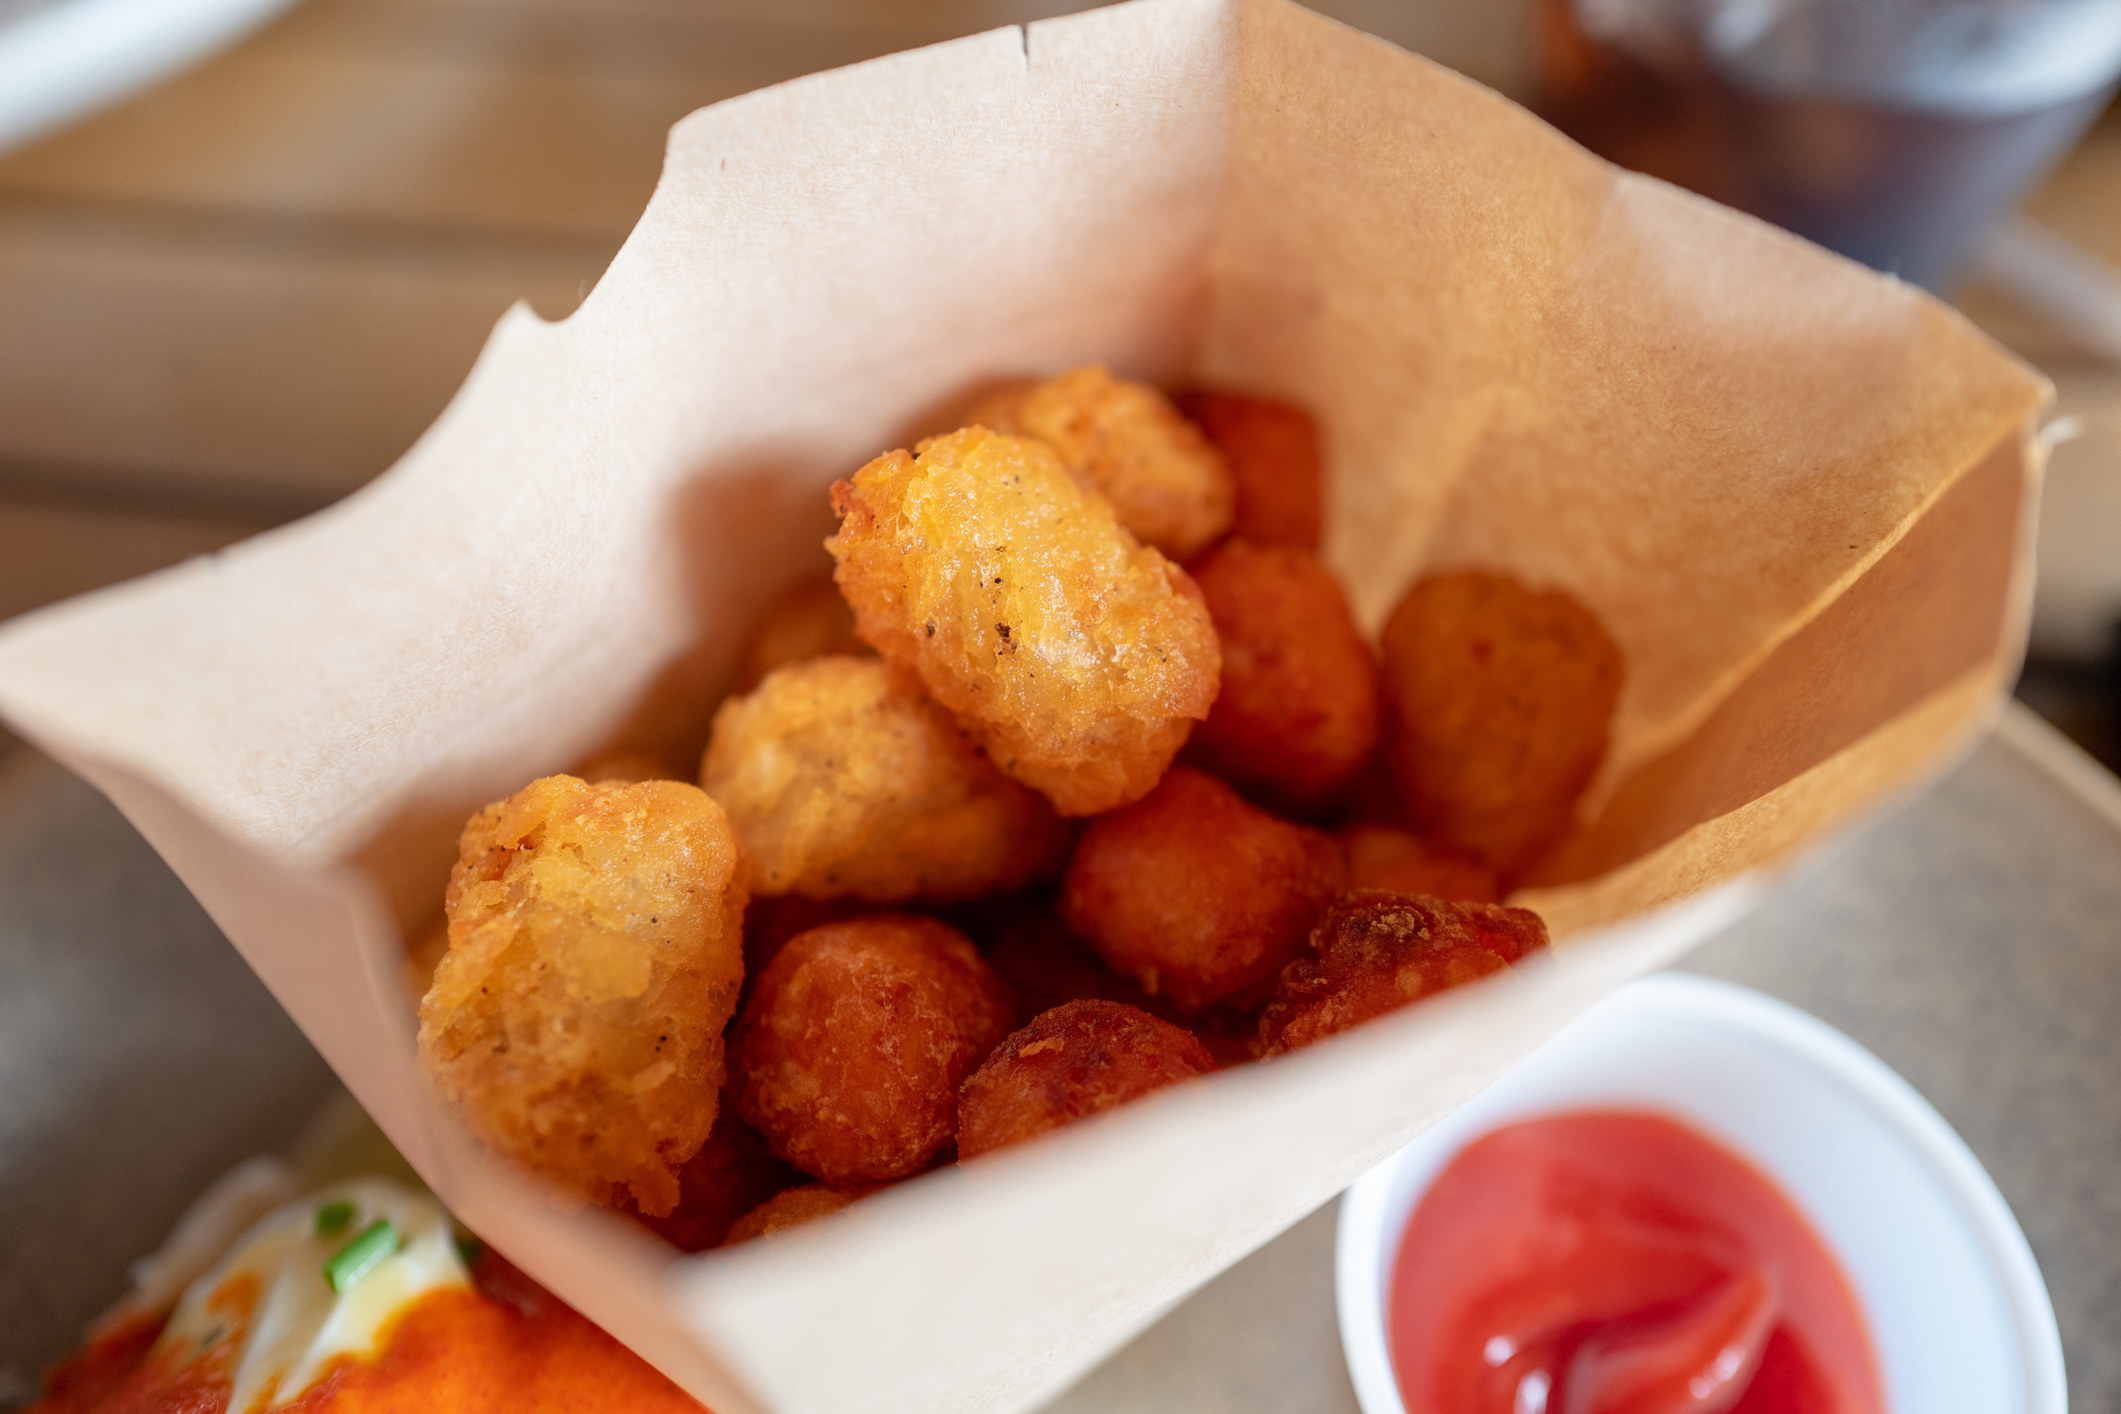 Paper bag filled with crispy tater tots and a side of ketchup